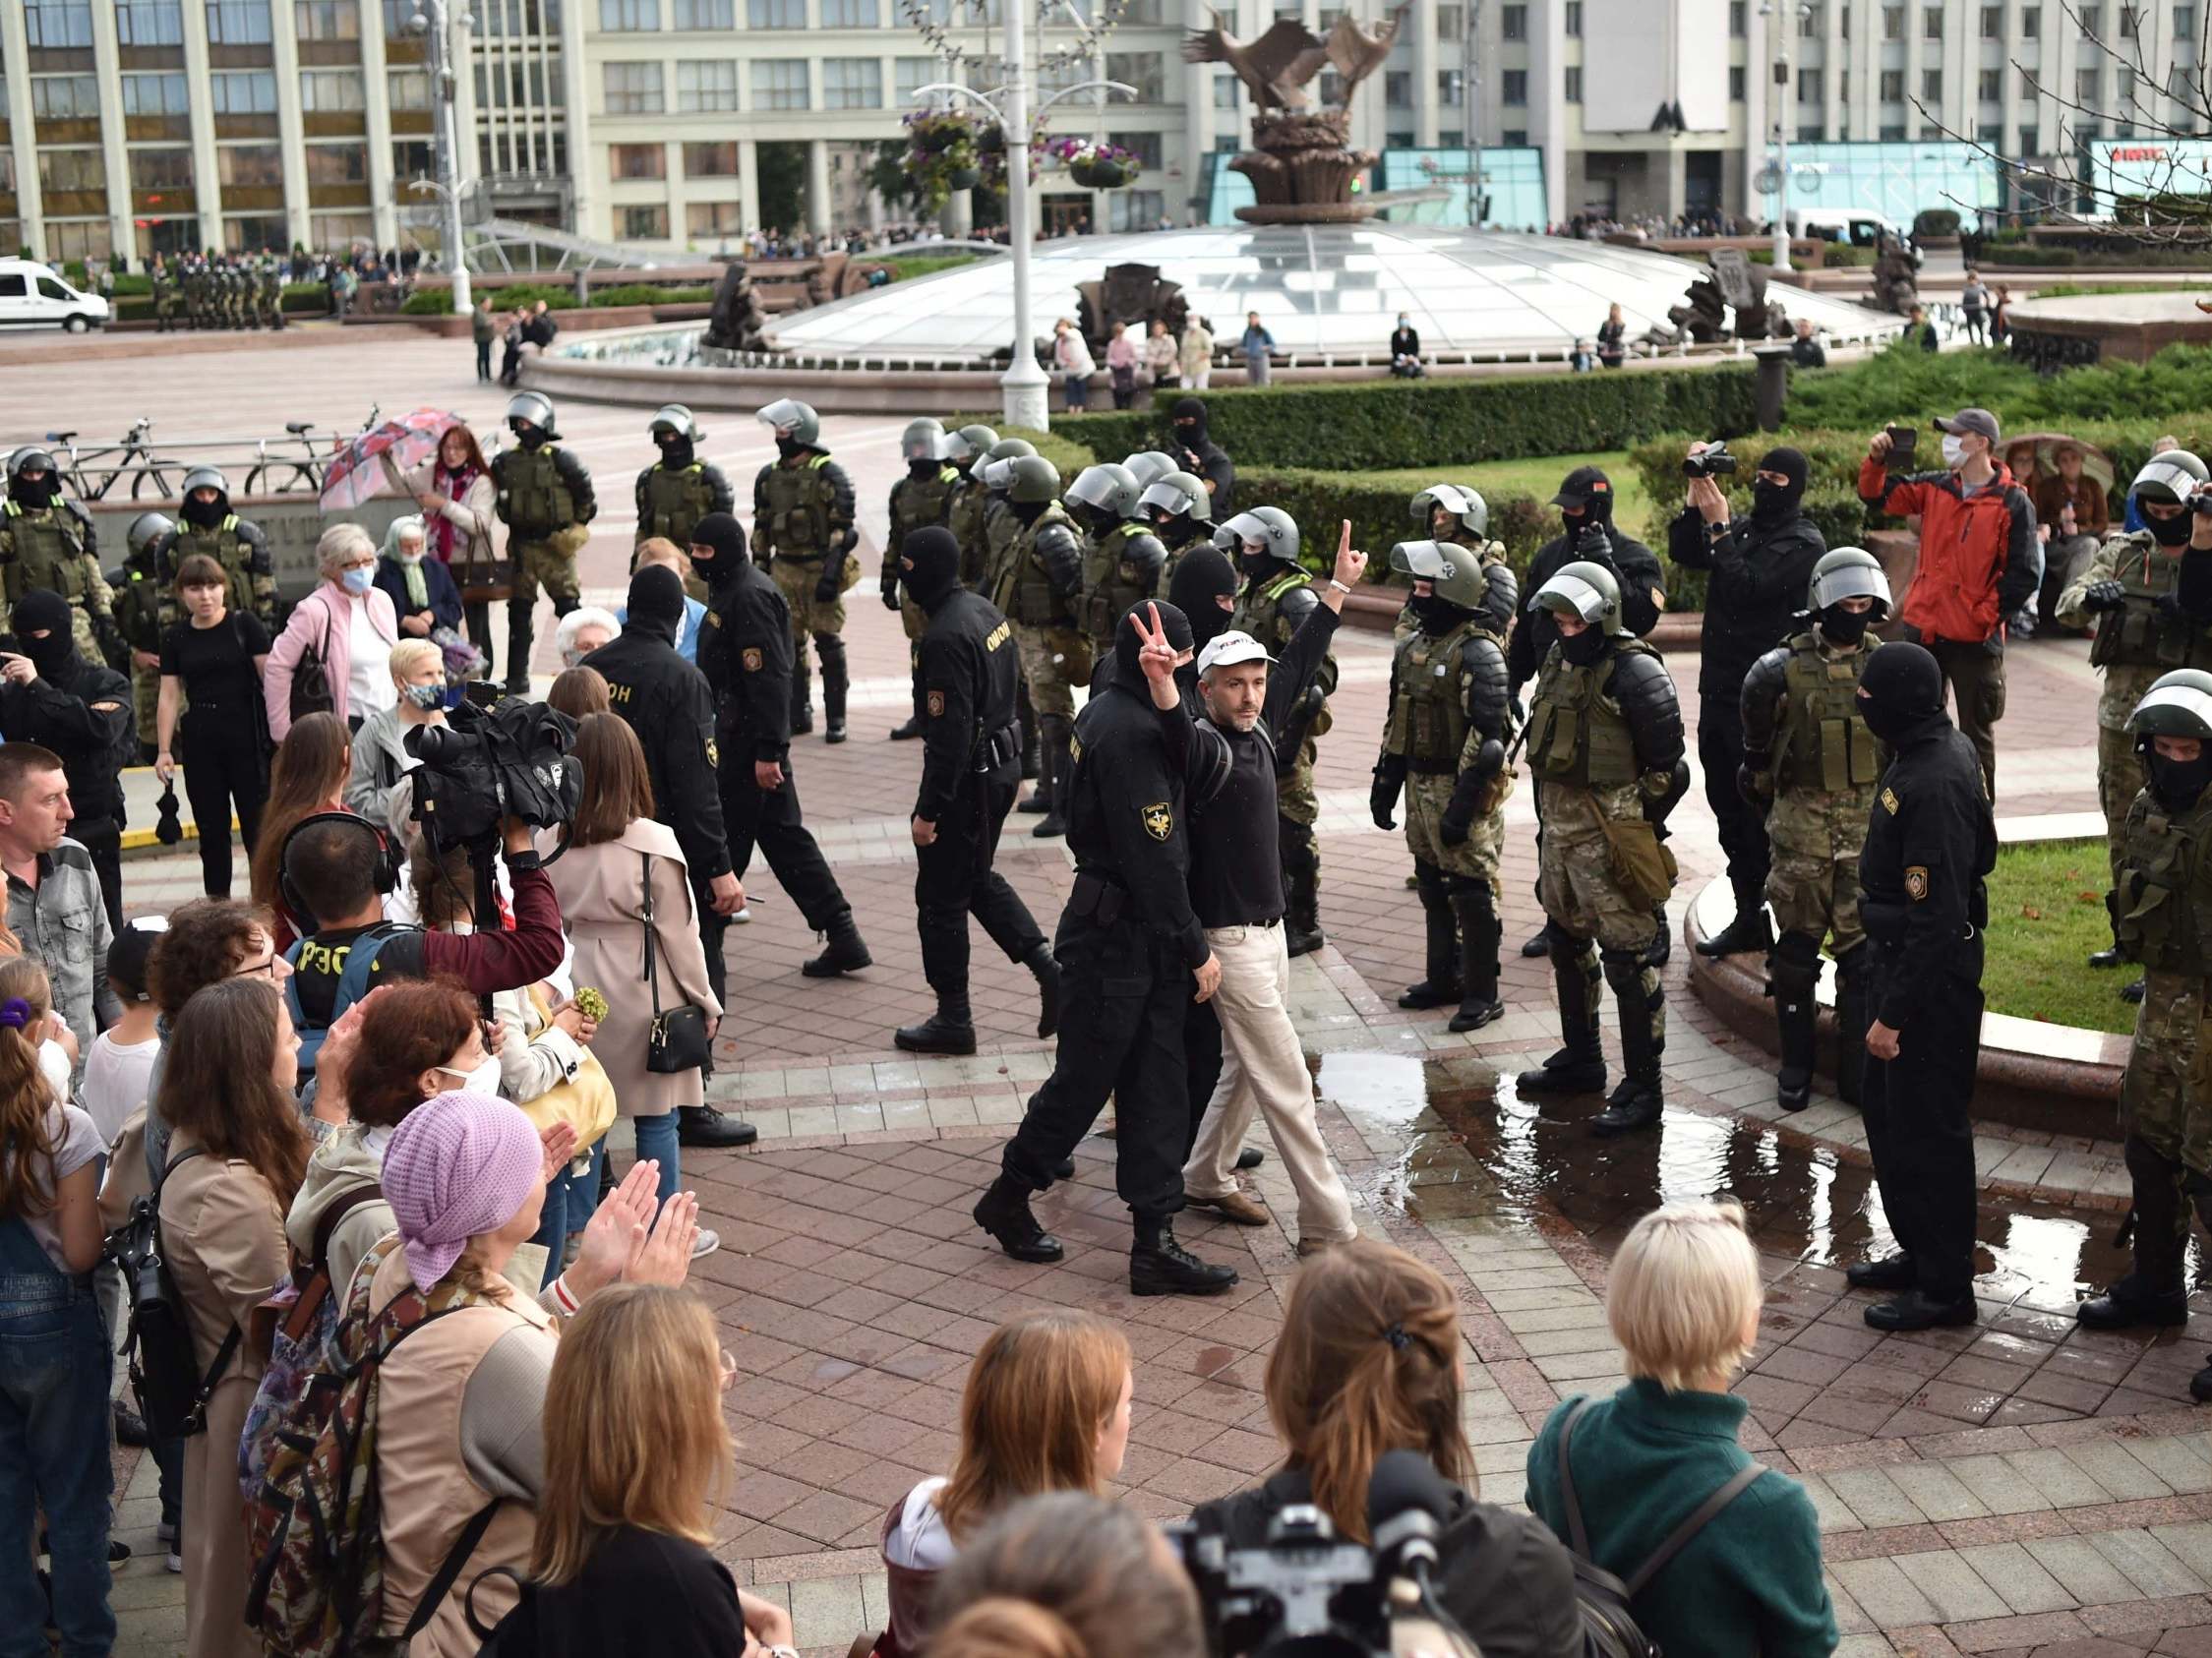 A protester is detained by police in Minsk